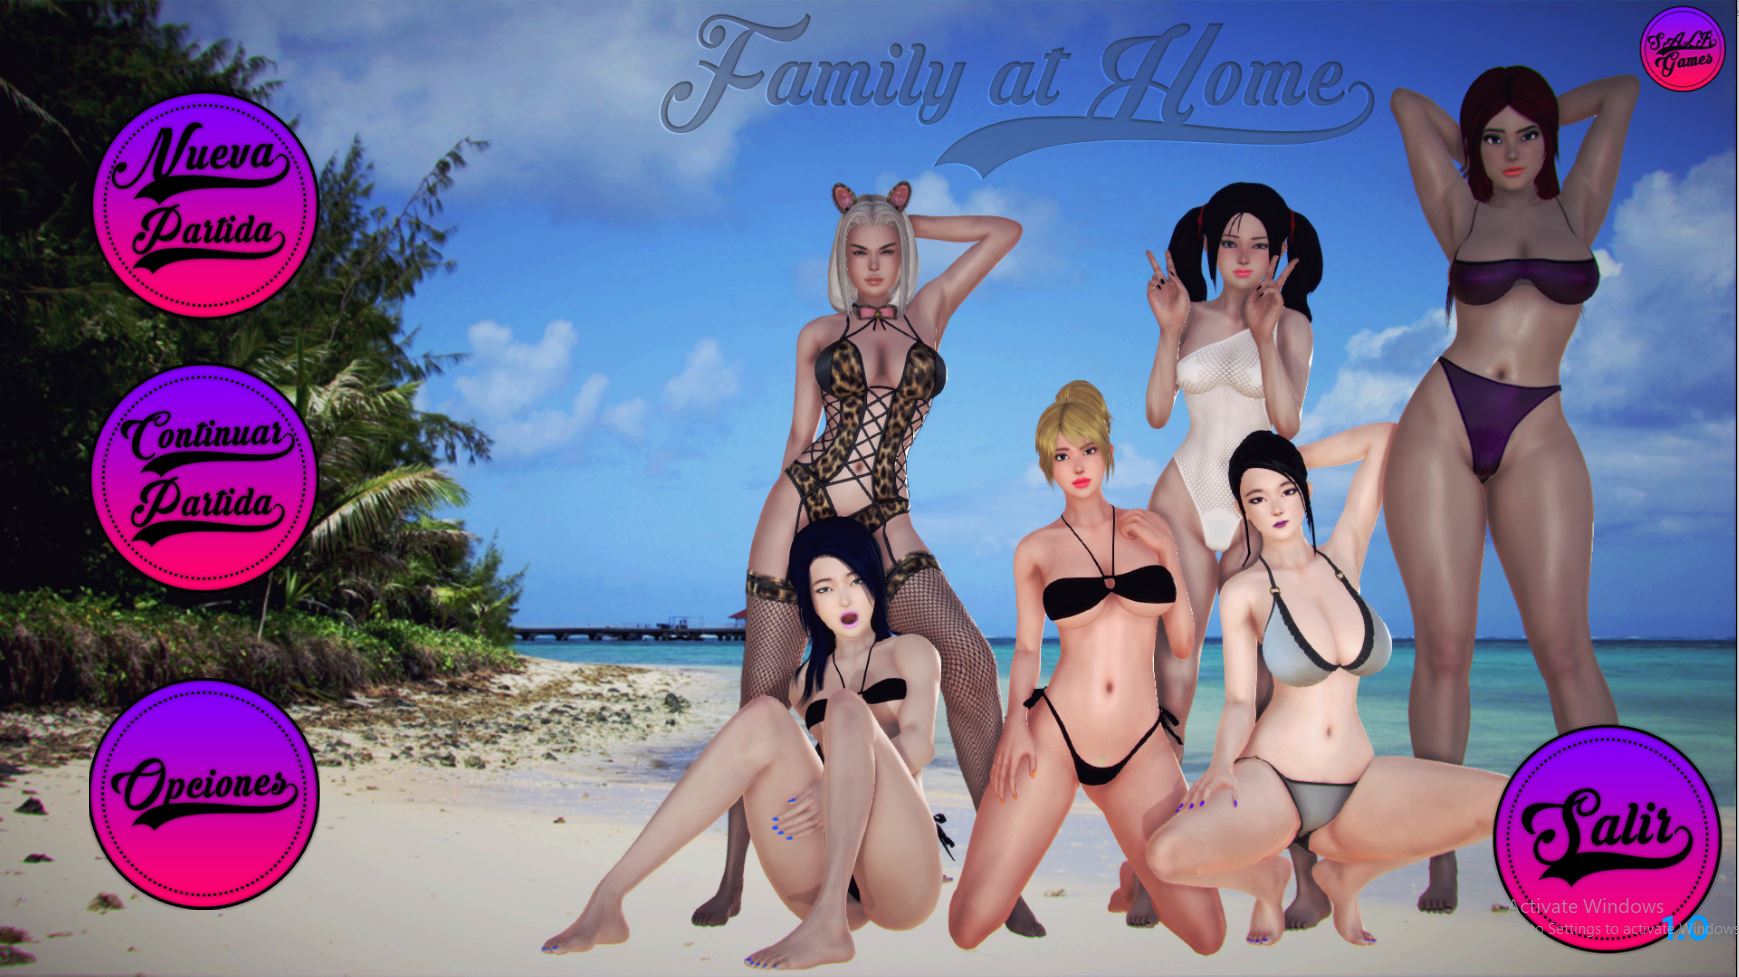 Free Homemade Porn Games - Adultgamesworld: Free Porn Games & Sex Games Â» Family At Home â€“ New Final  Version 1.0 (Full Game) [SALR Games]